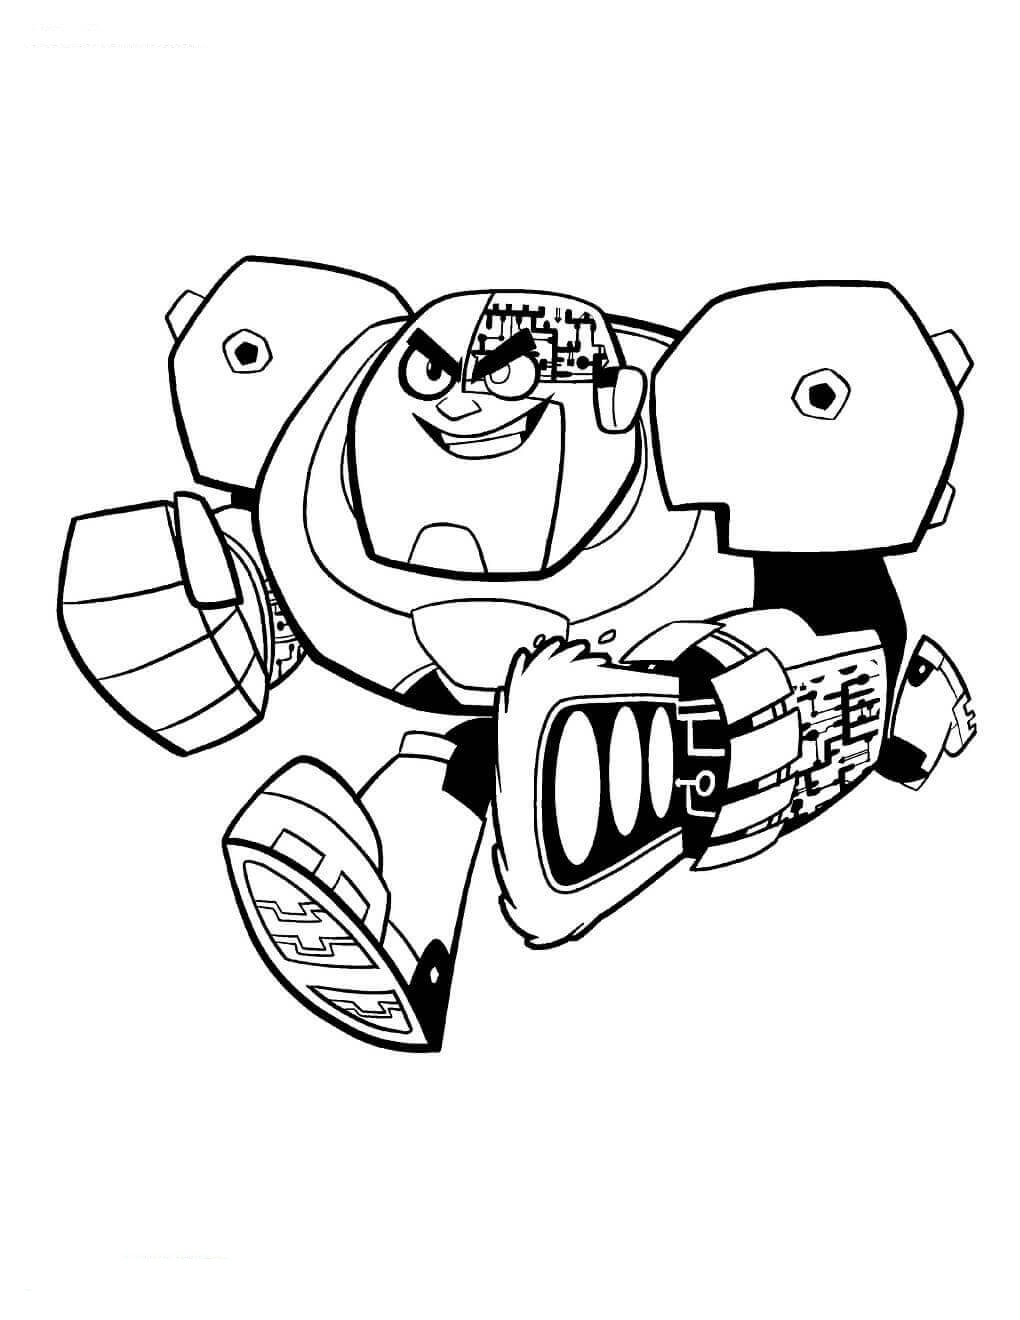 Rampage Cyborg Coloring Page - Free Printable Coloring Pages for Kids